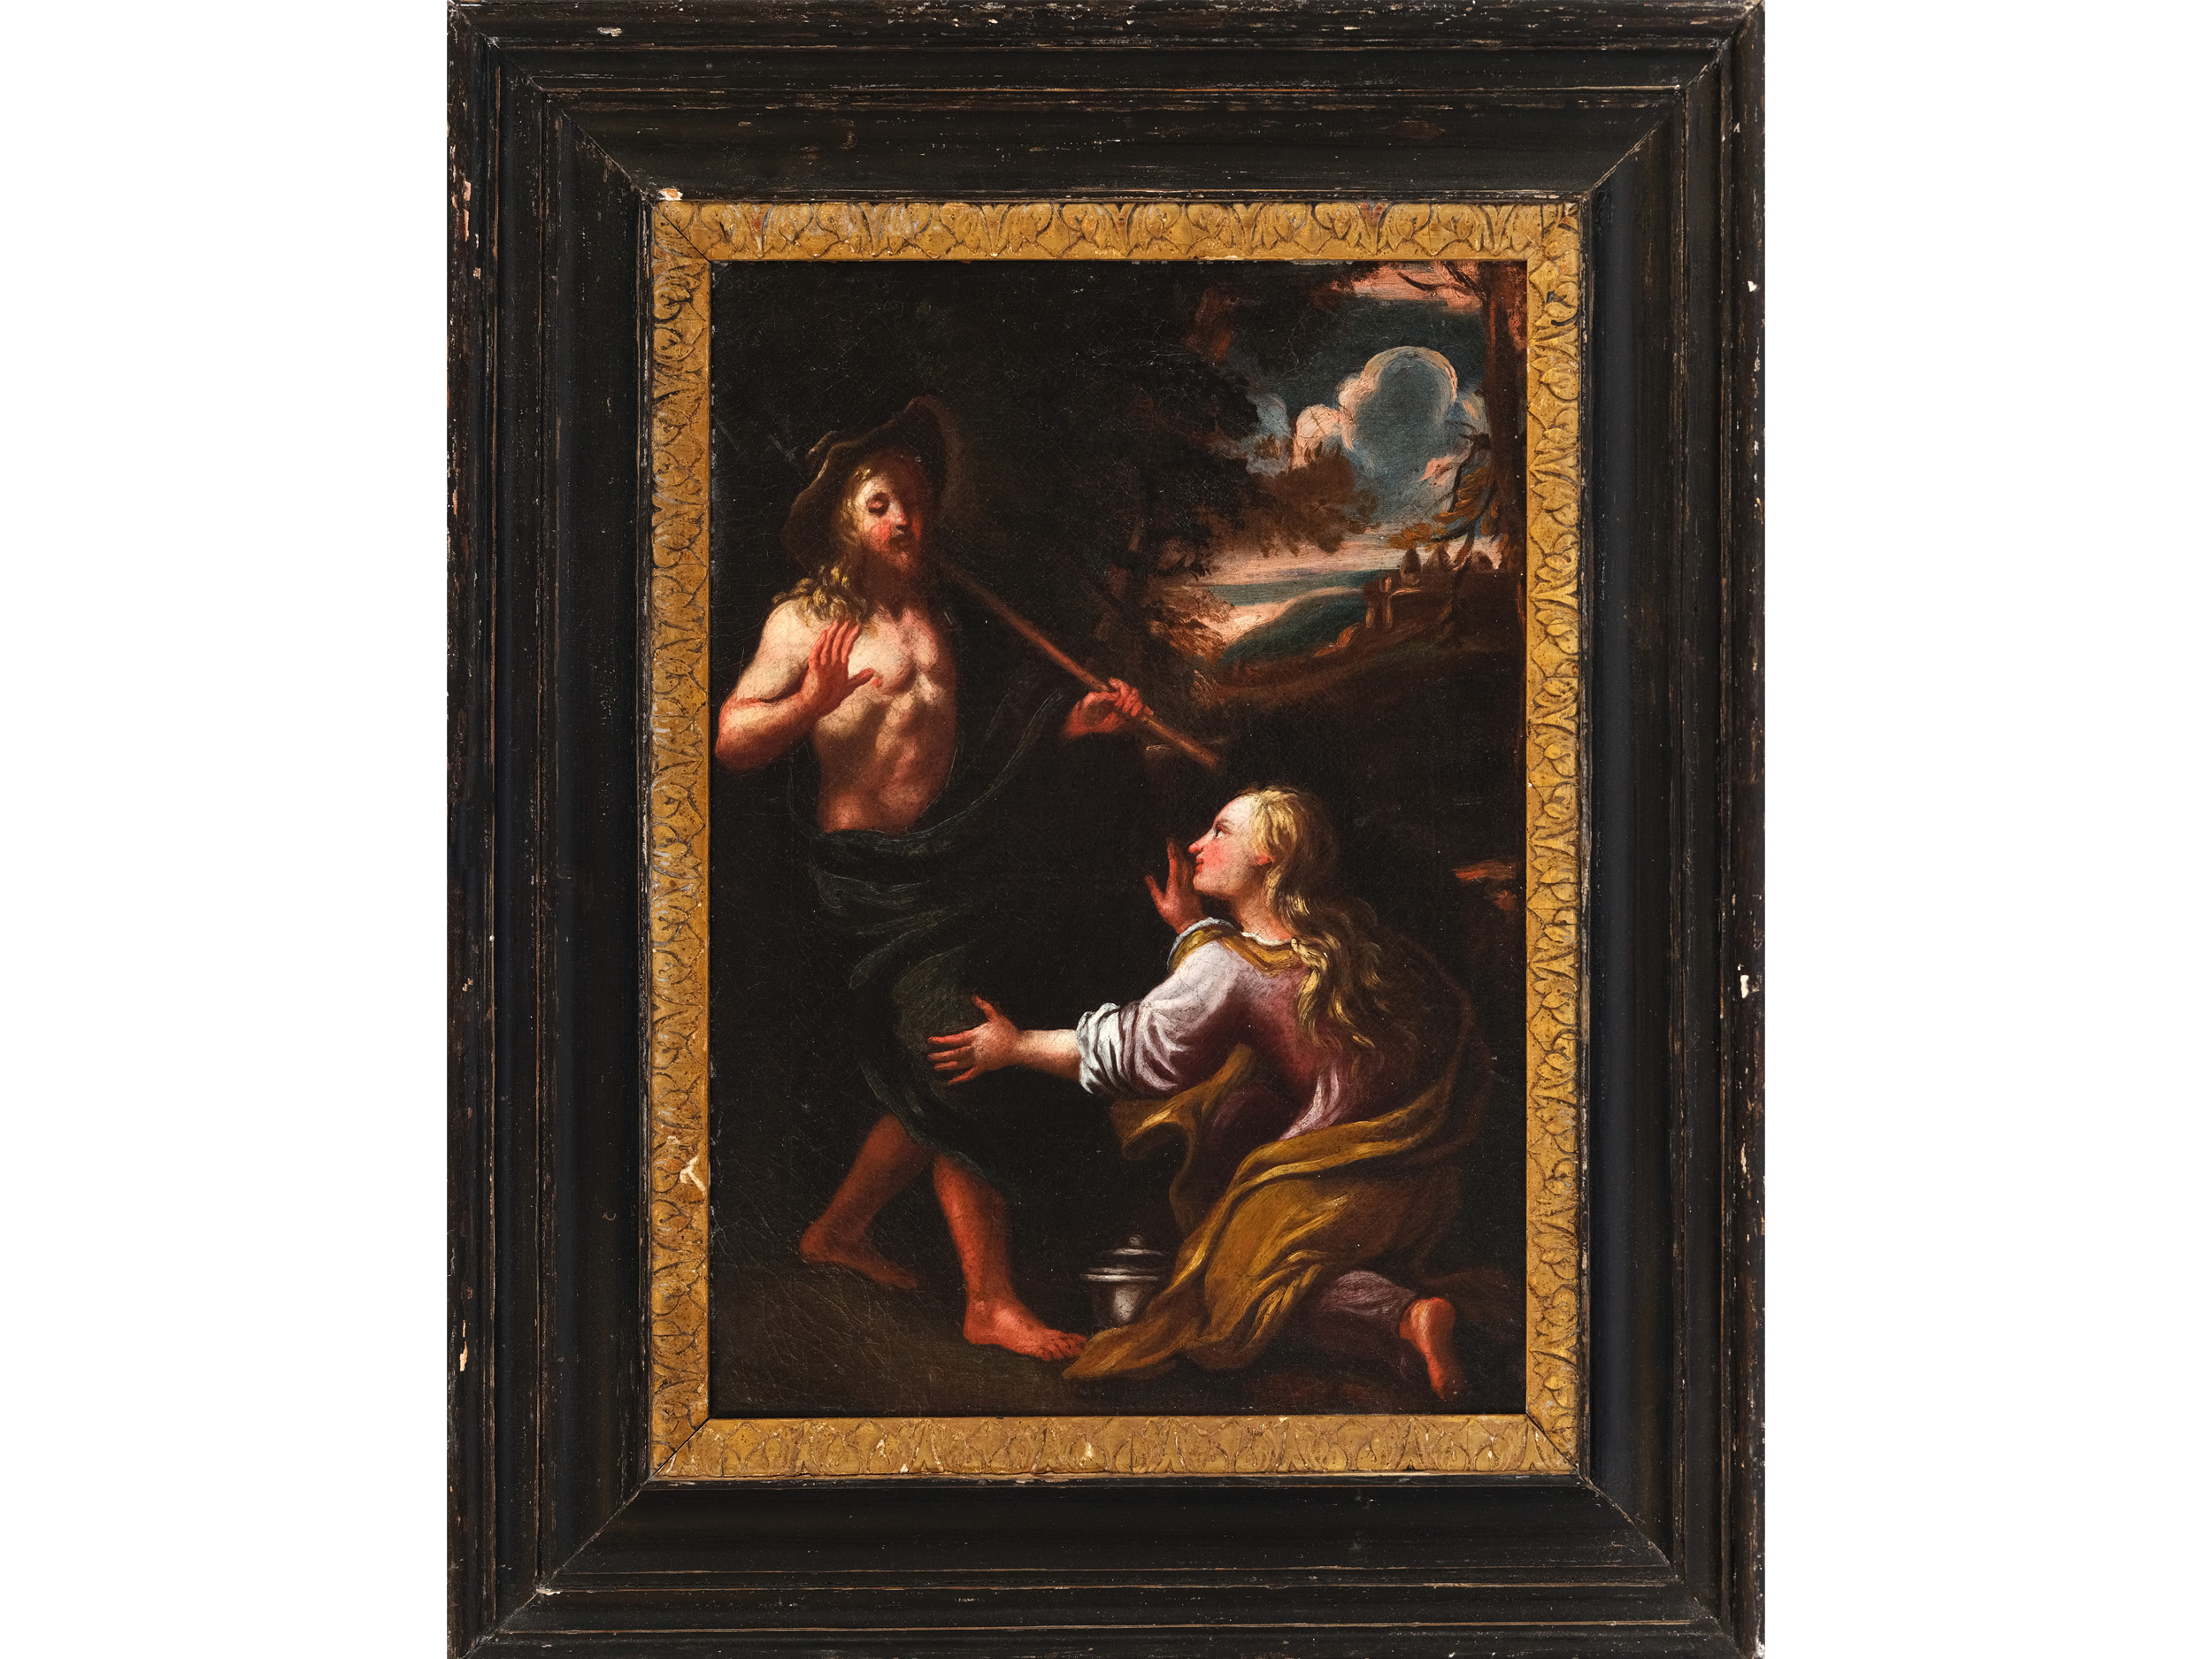 Unknown painter, Noli me tangere, South German, 18th century - Image 2 of 3